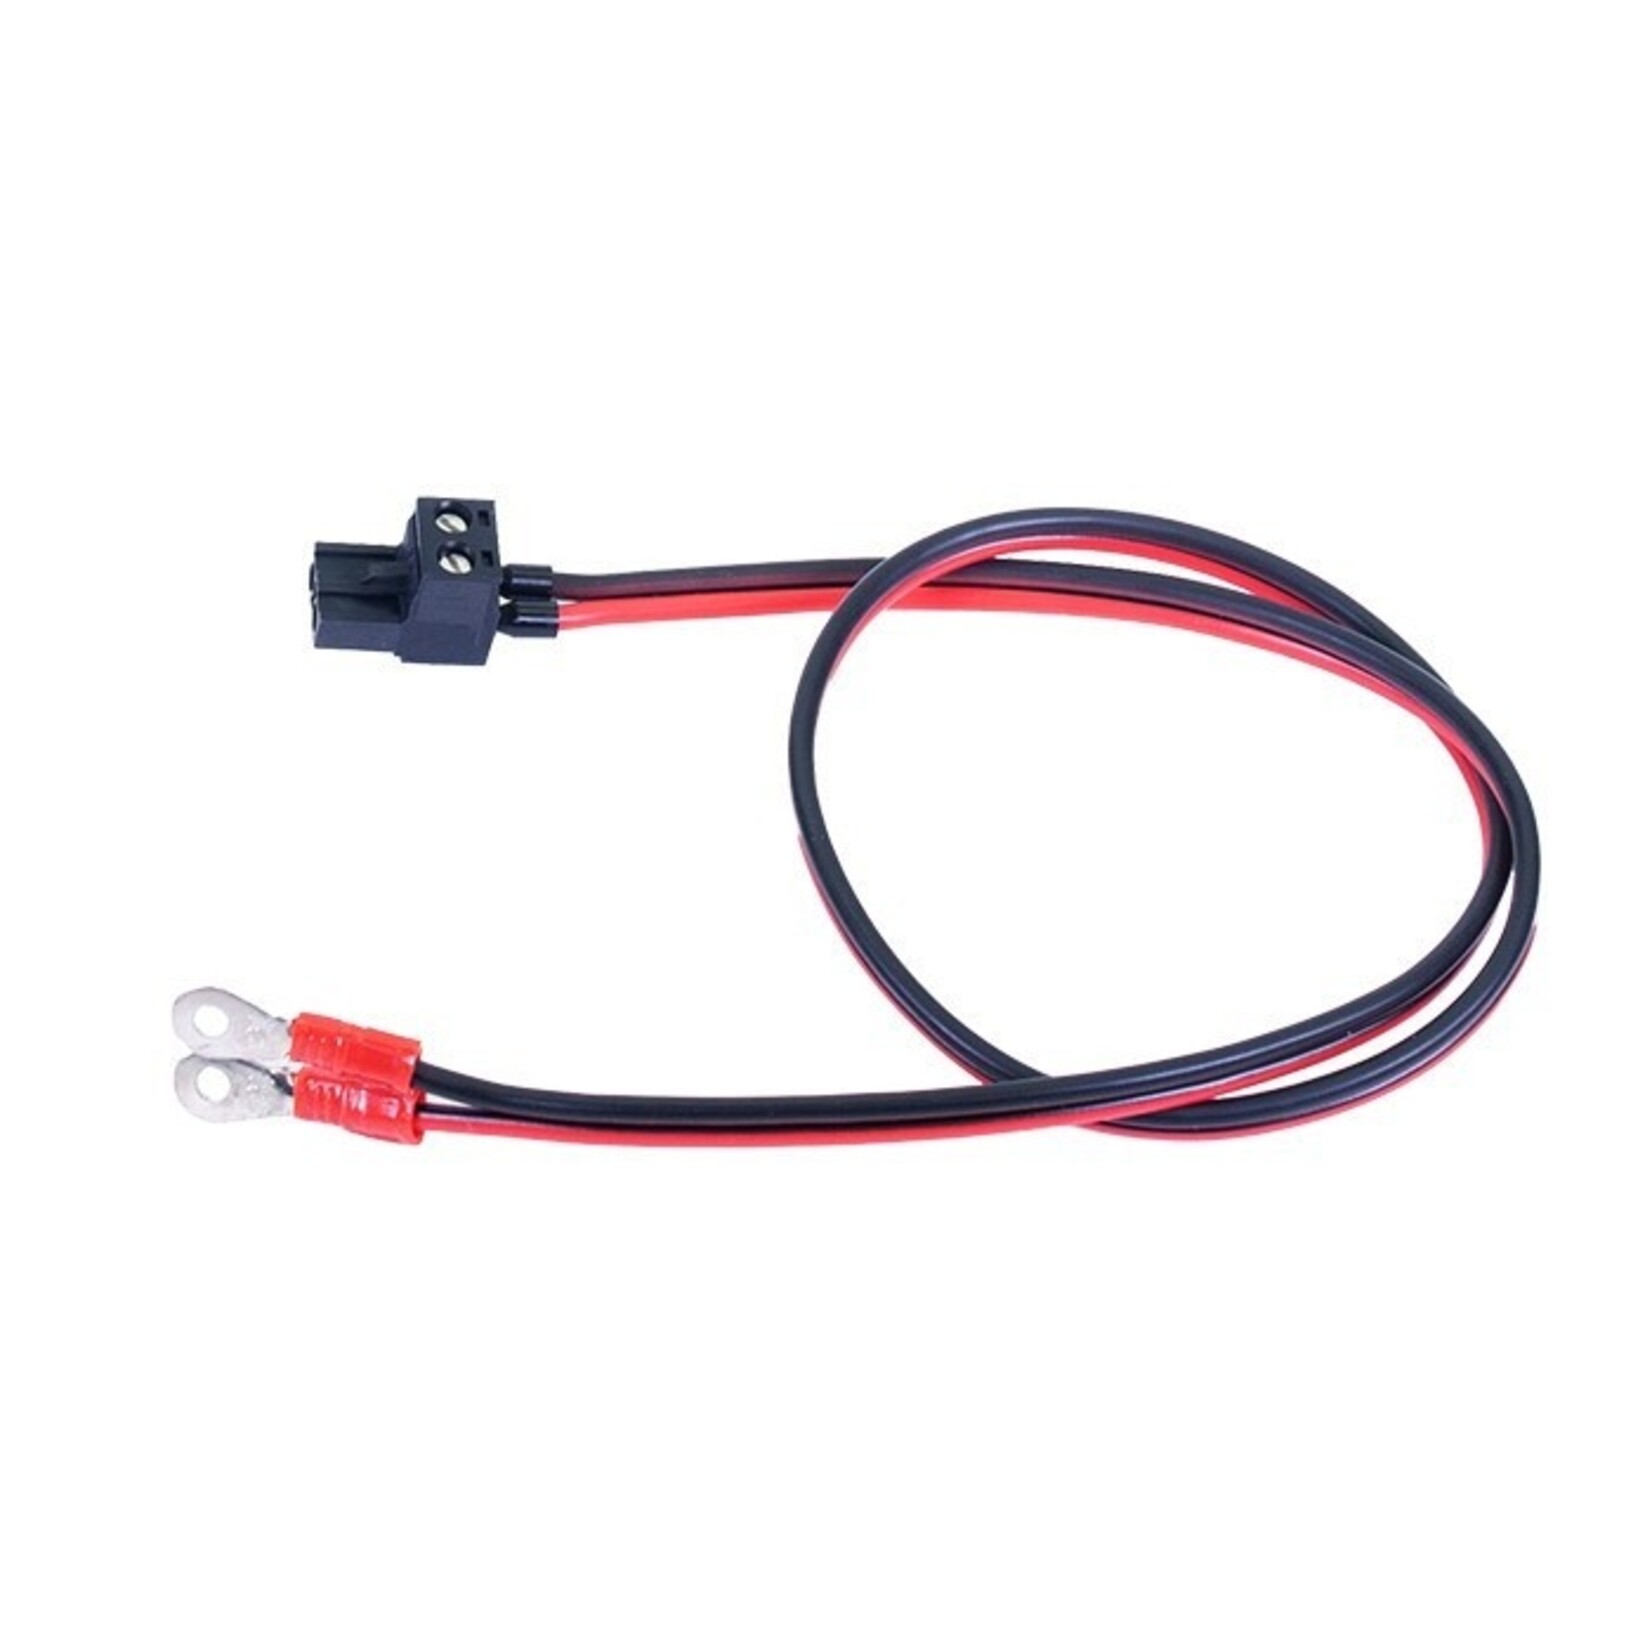 Prusa Research Heatbed-Buddy power cable for Mini/Mini+